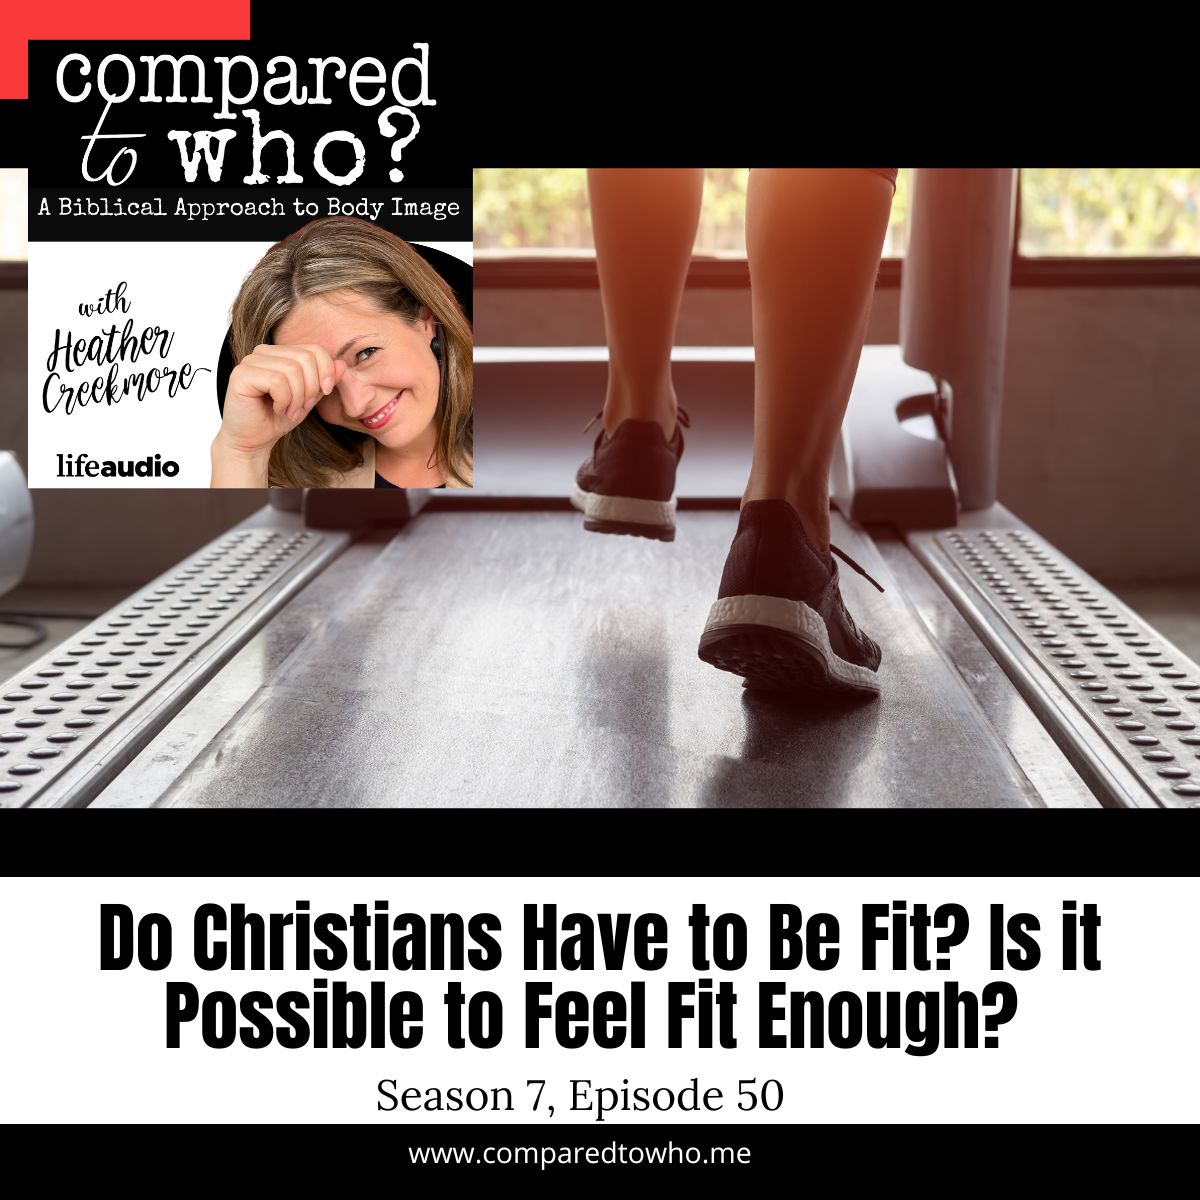 Do Christians Have to Be Fit? Can I Ever Feel Fit Enough?